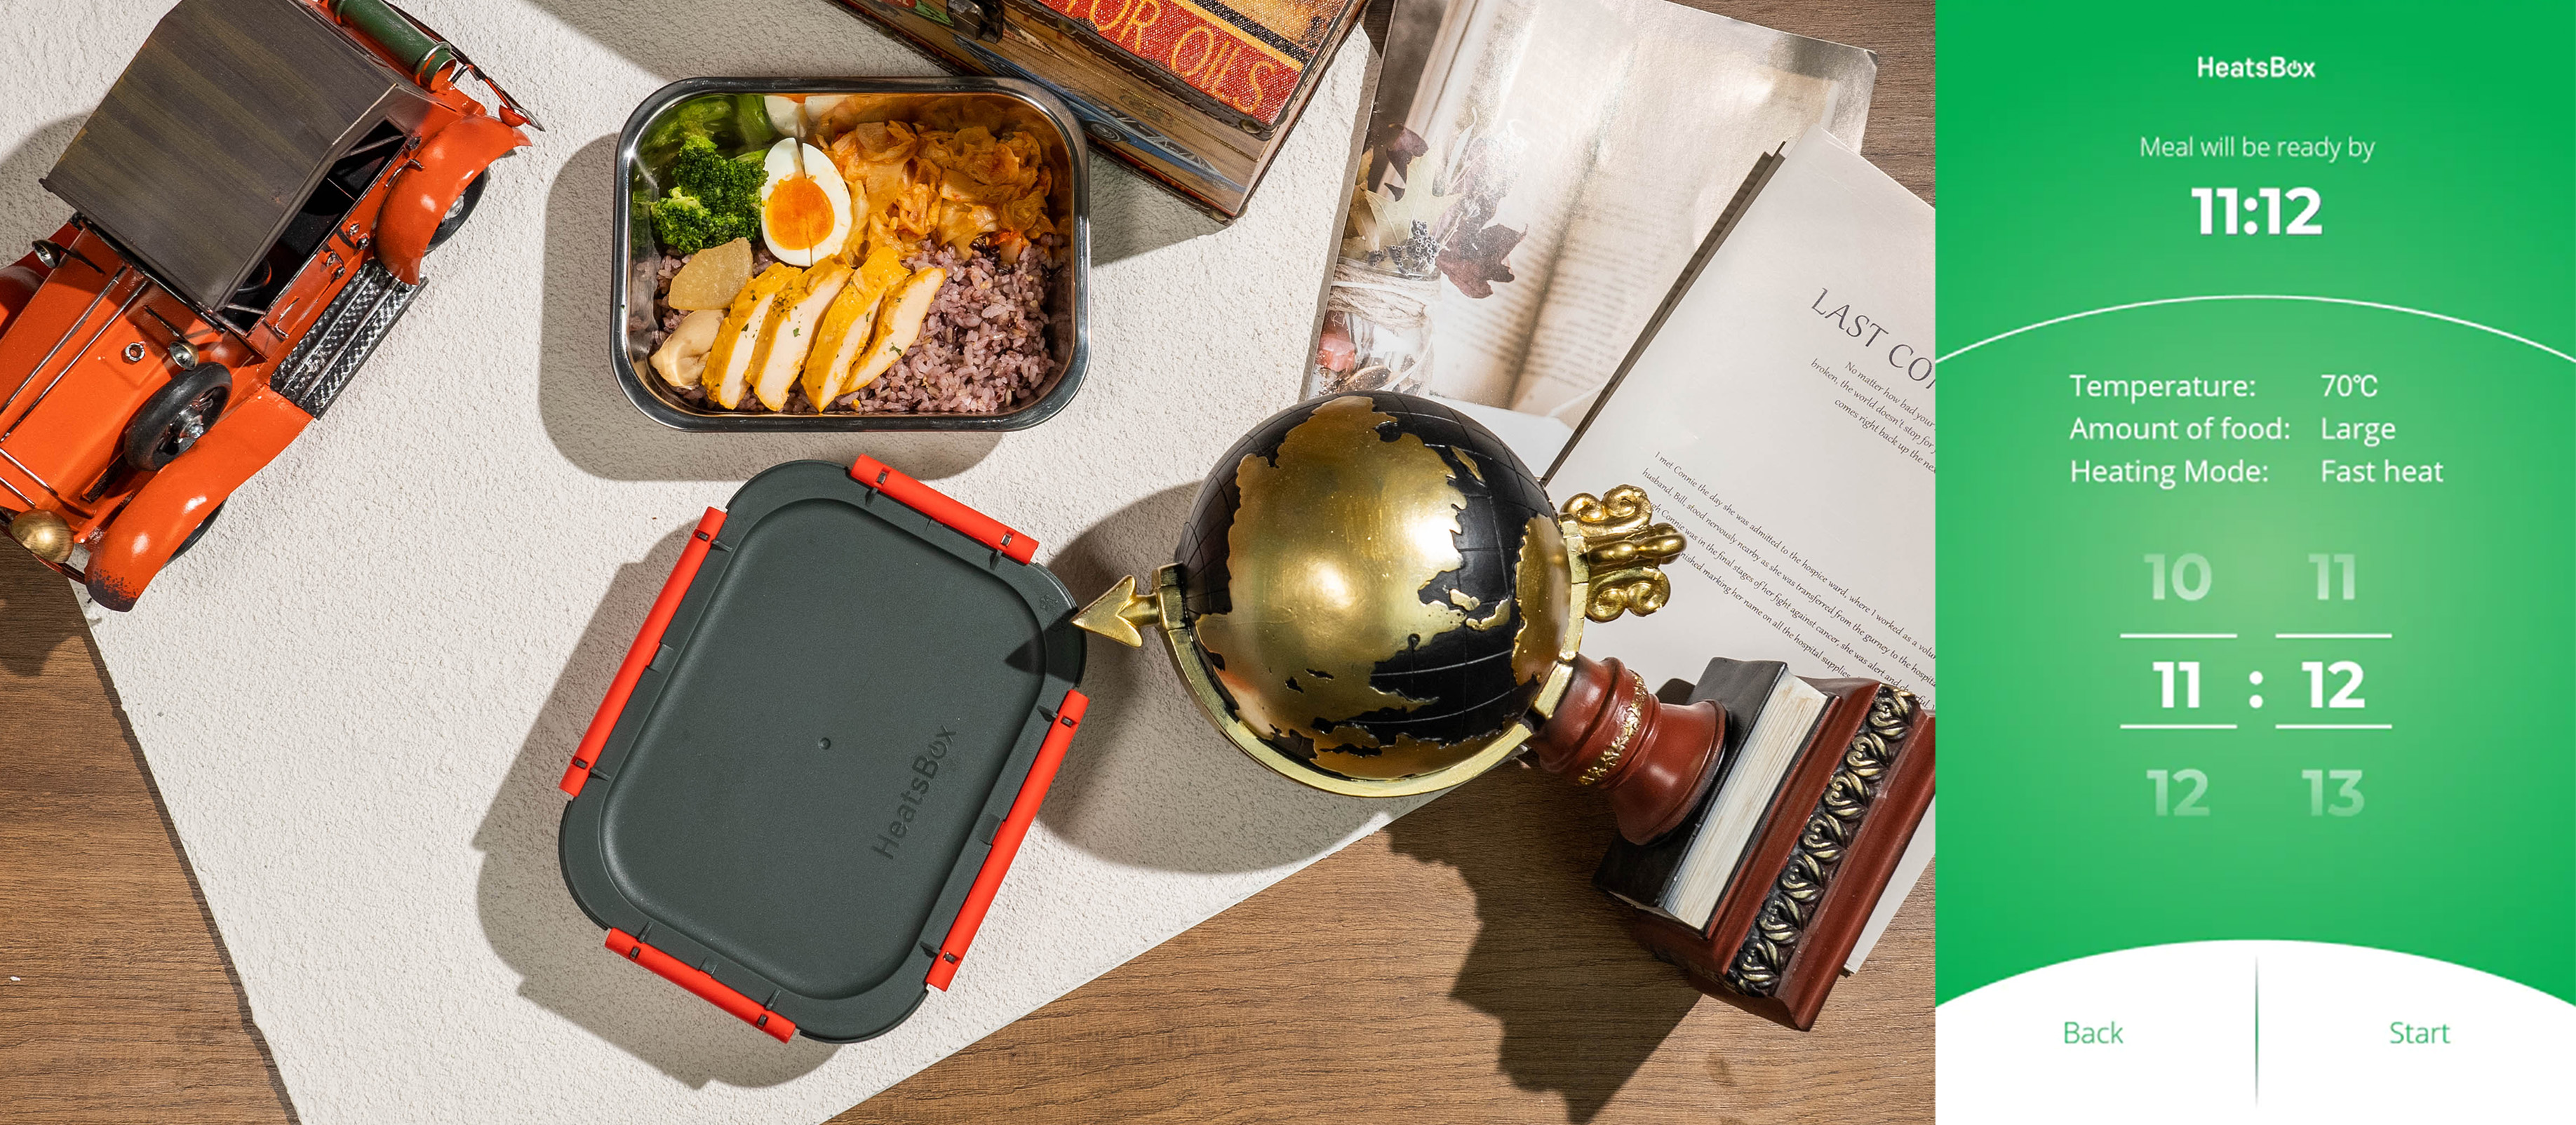 HeatsBox Review: Heat Up Your Lunch Without Having To Use A Microwave!